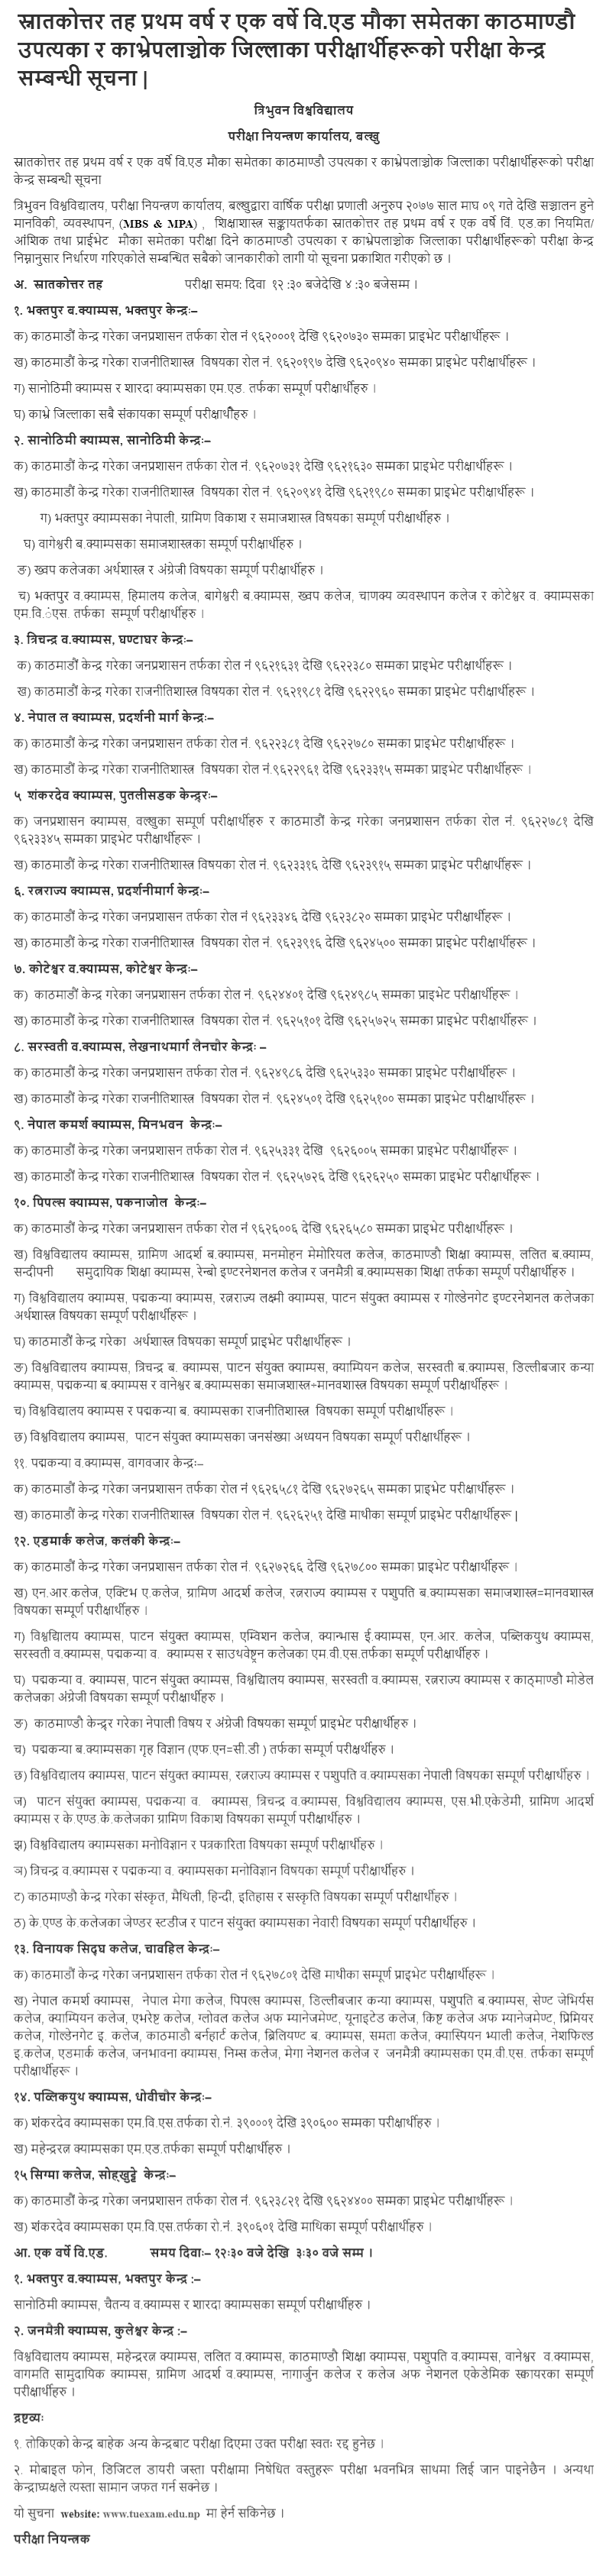 Master Level First Year and One Year B.Ed. Exam Center (Kathmandu Valley and Kavre)